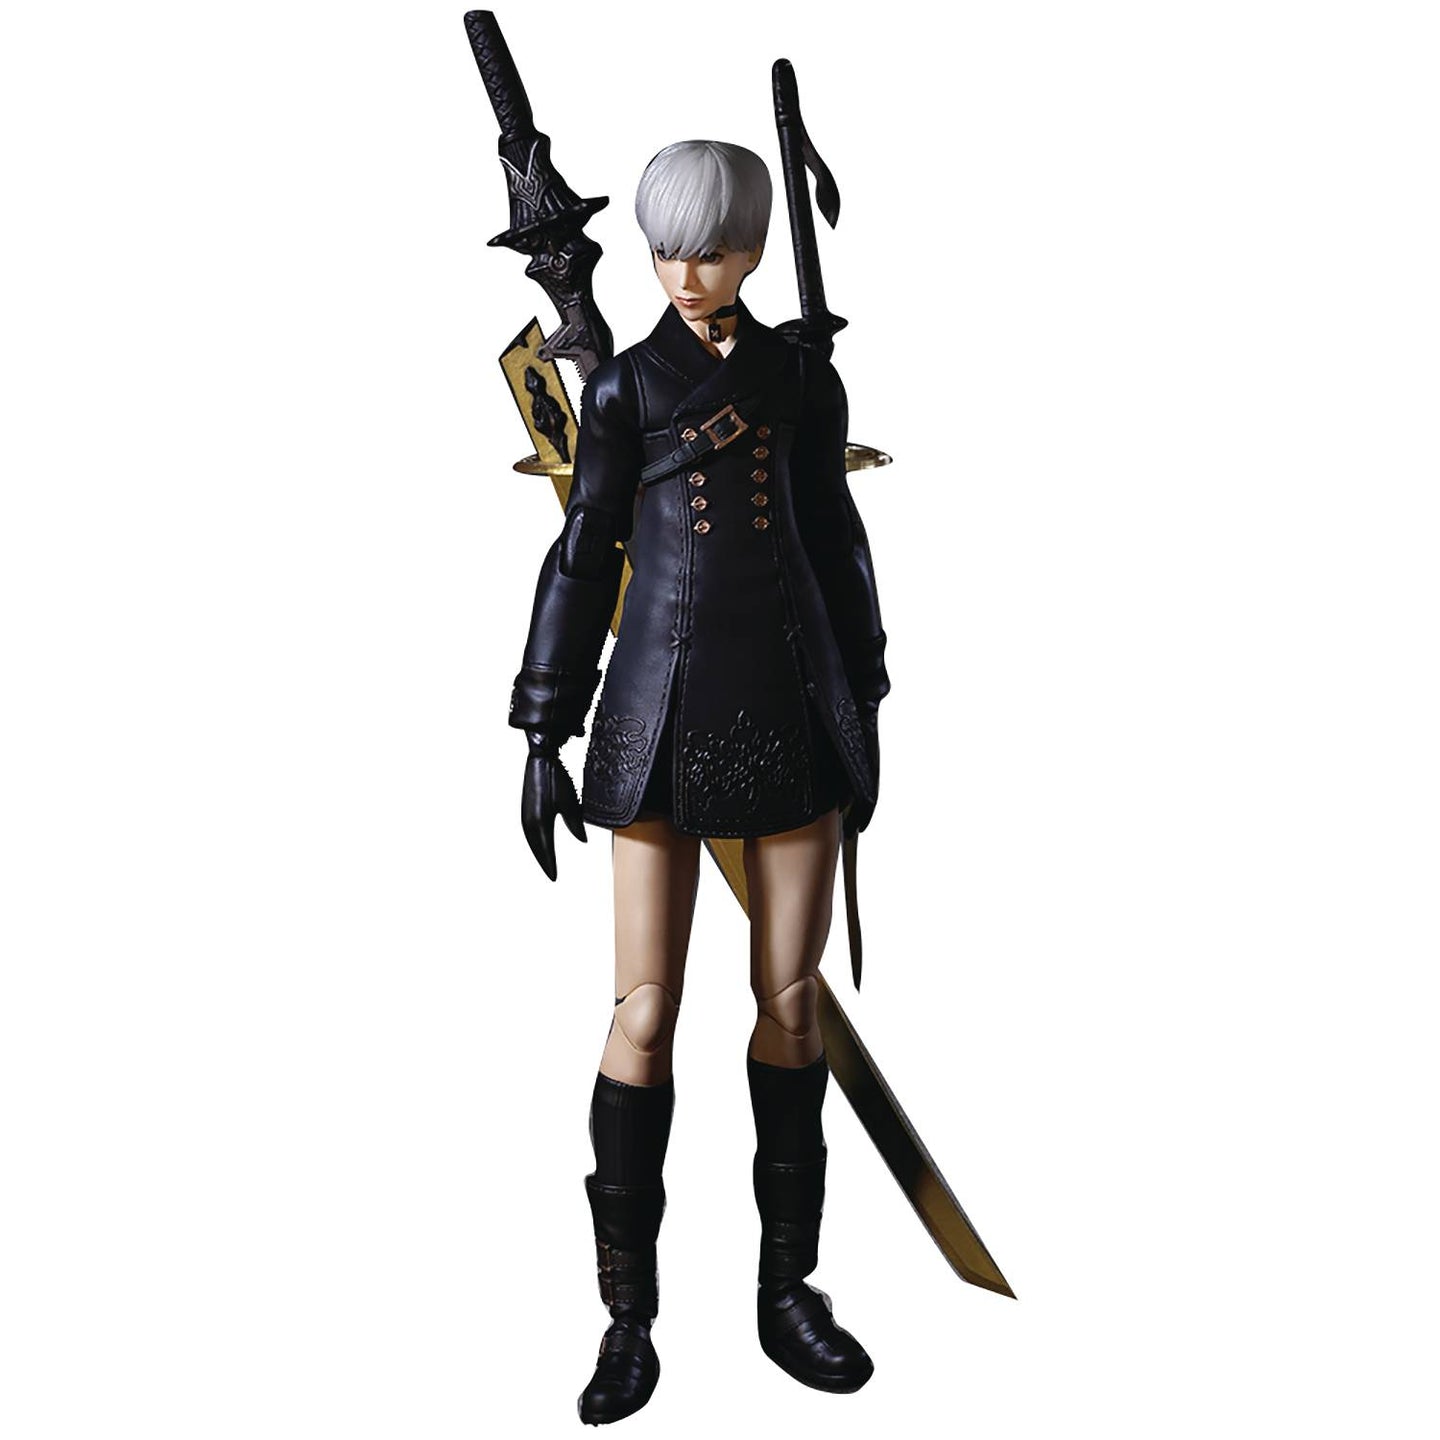 Nier Automata Play Arts Kai 9S Yorha No 9 Type S PVC Action Figure Deluxe Version with Pod 153 and interchangeable hands